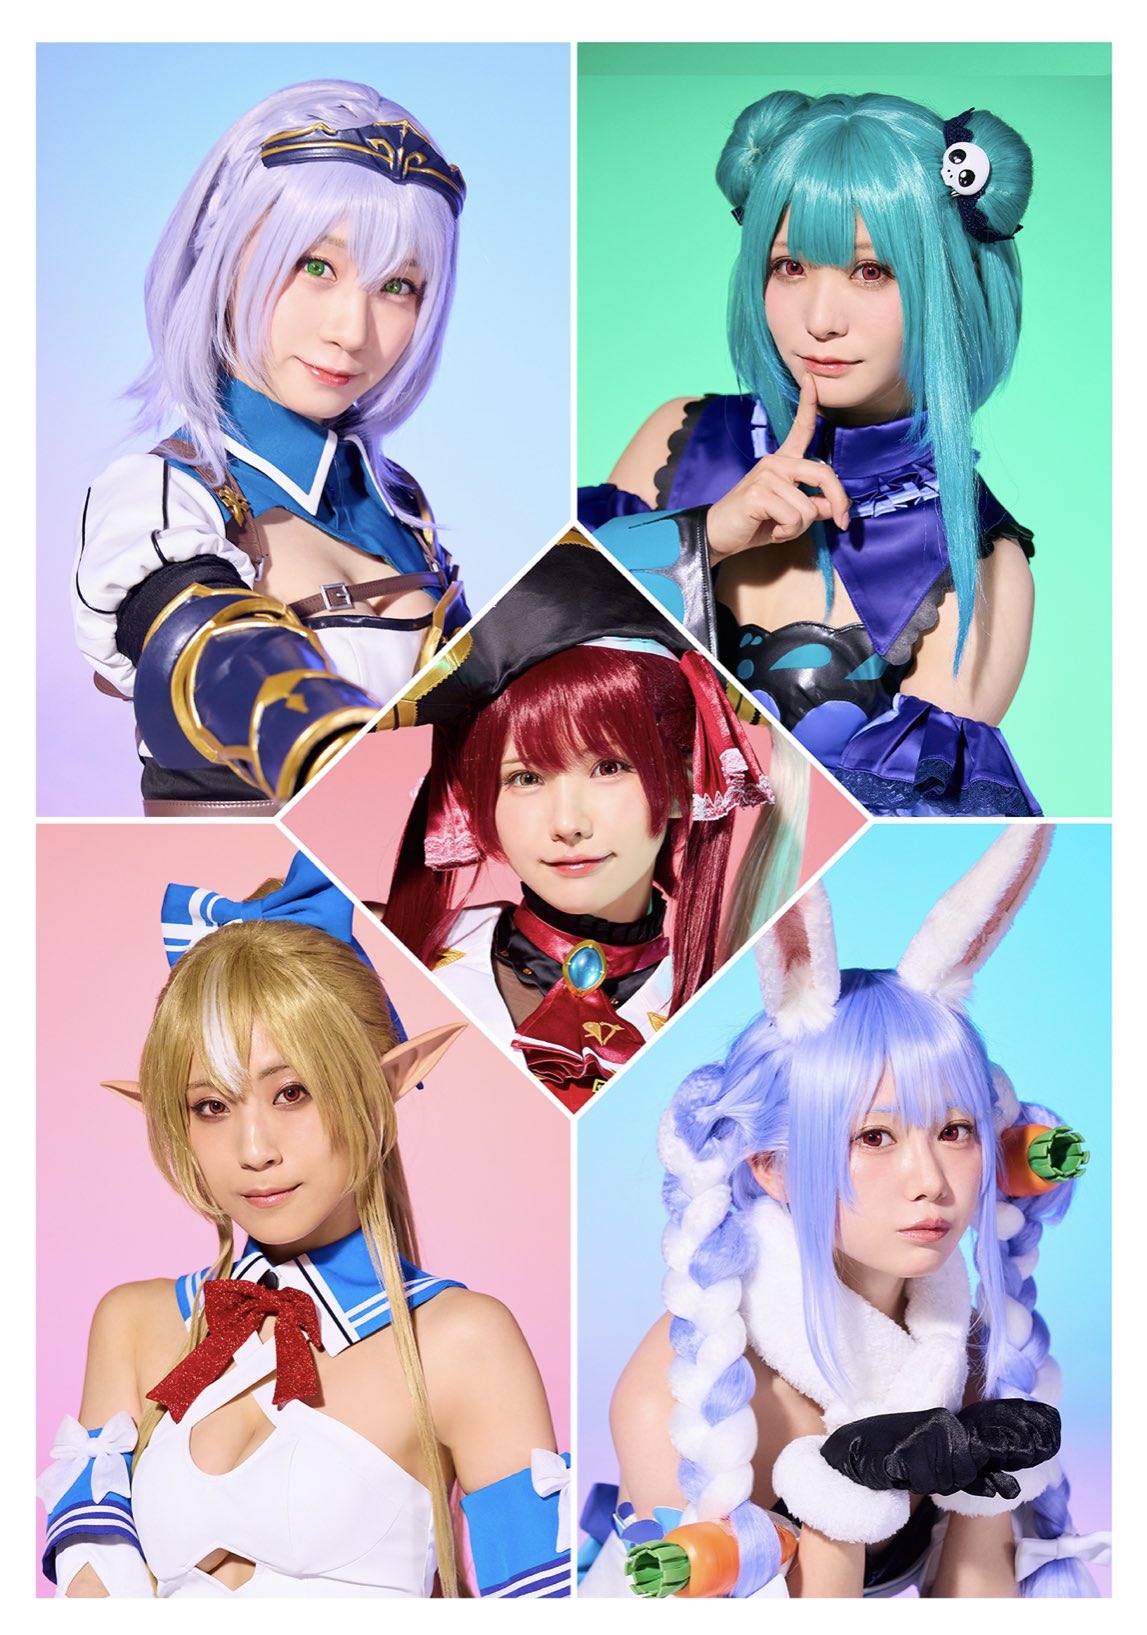 Hololive Fantasy cosplay